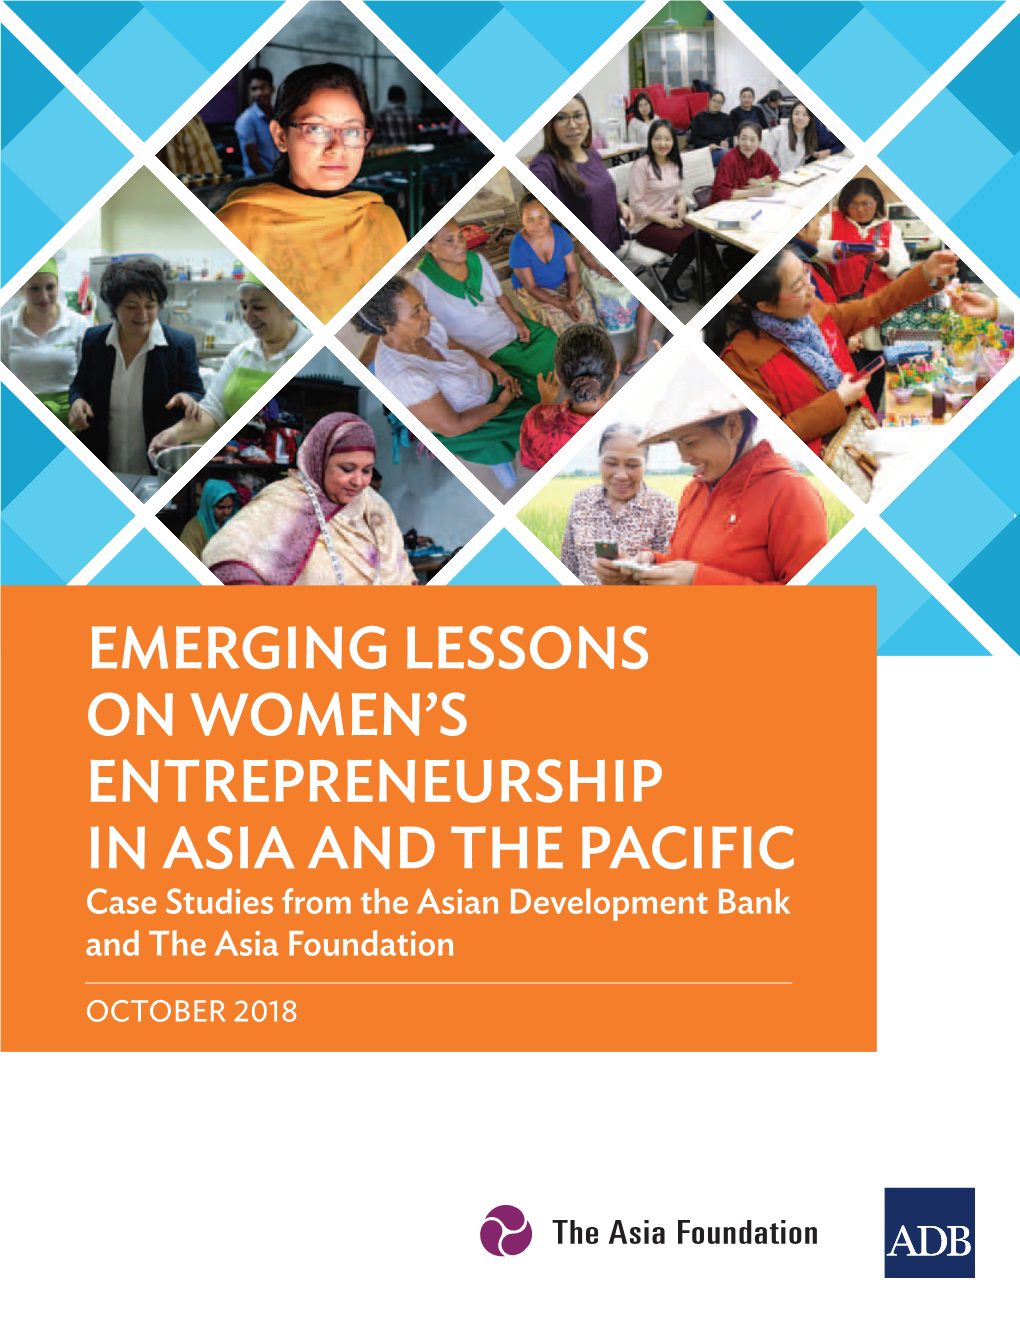 Emerging Lessons on Women's Entrepreneurship in Asia and The